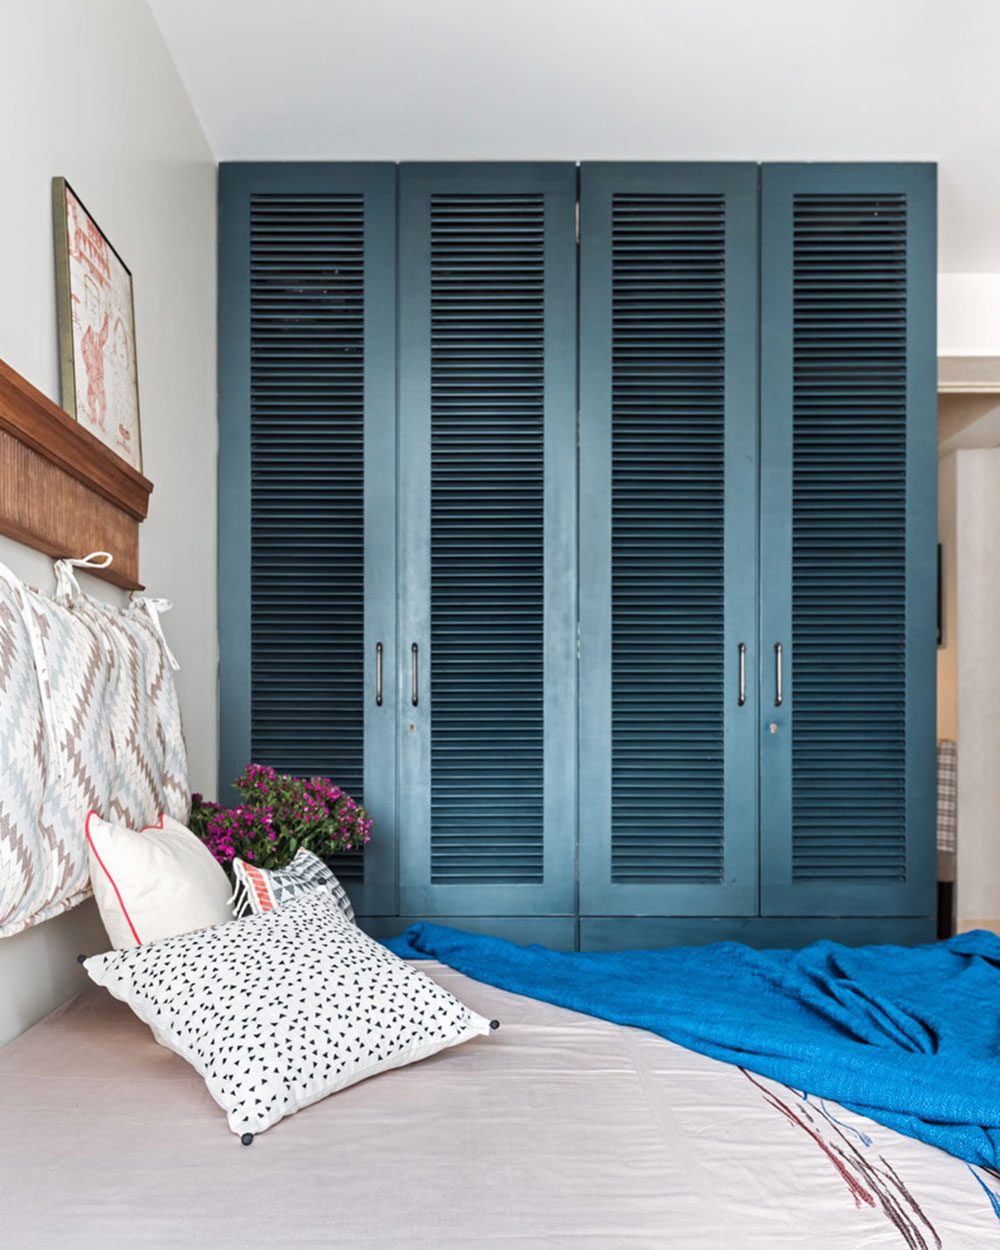 Closet Doors Ideas You Should Try In Your Room